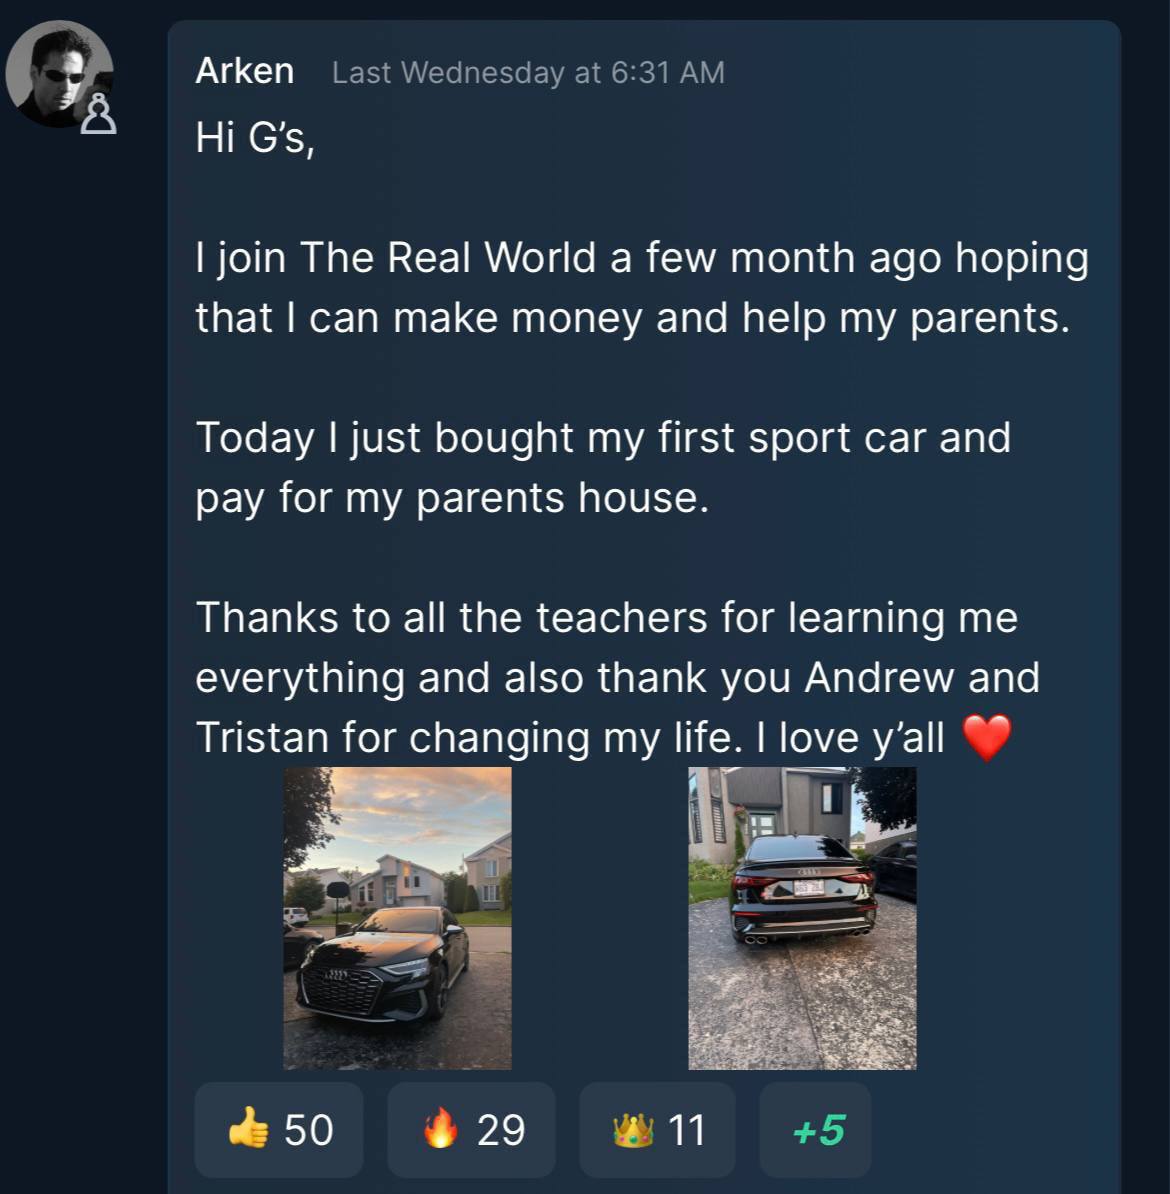 This could be YOU with a new RS3 & Paying for your parents house.

But you continue to be a lazy loser.

If you work hard inside THE REAL WORLD, you can achieve anything.

Do you understand?

Learn how here: therealworldtate.ag